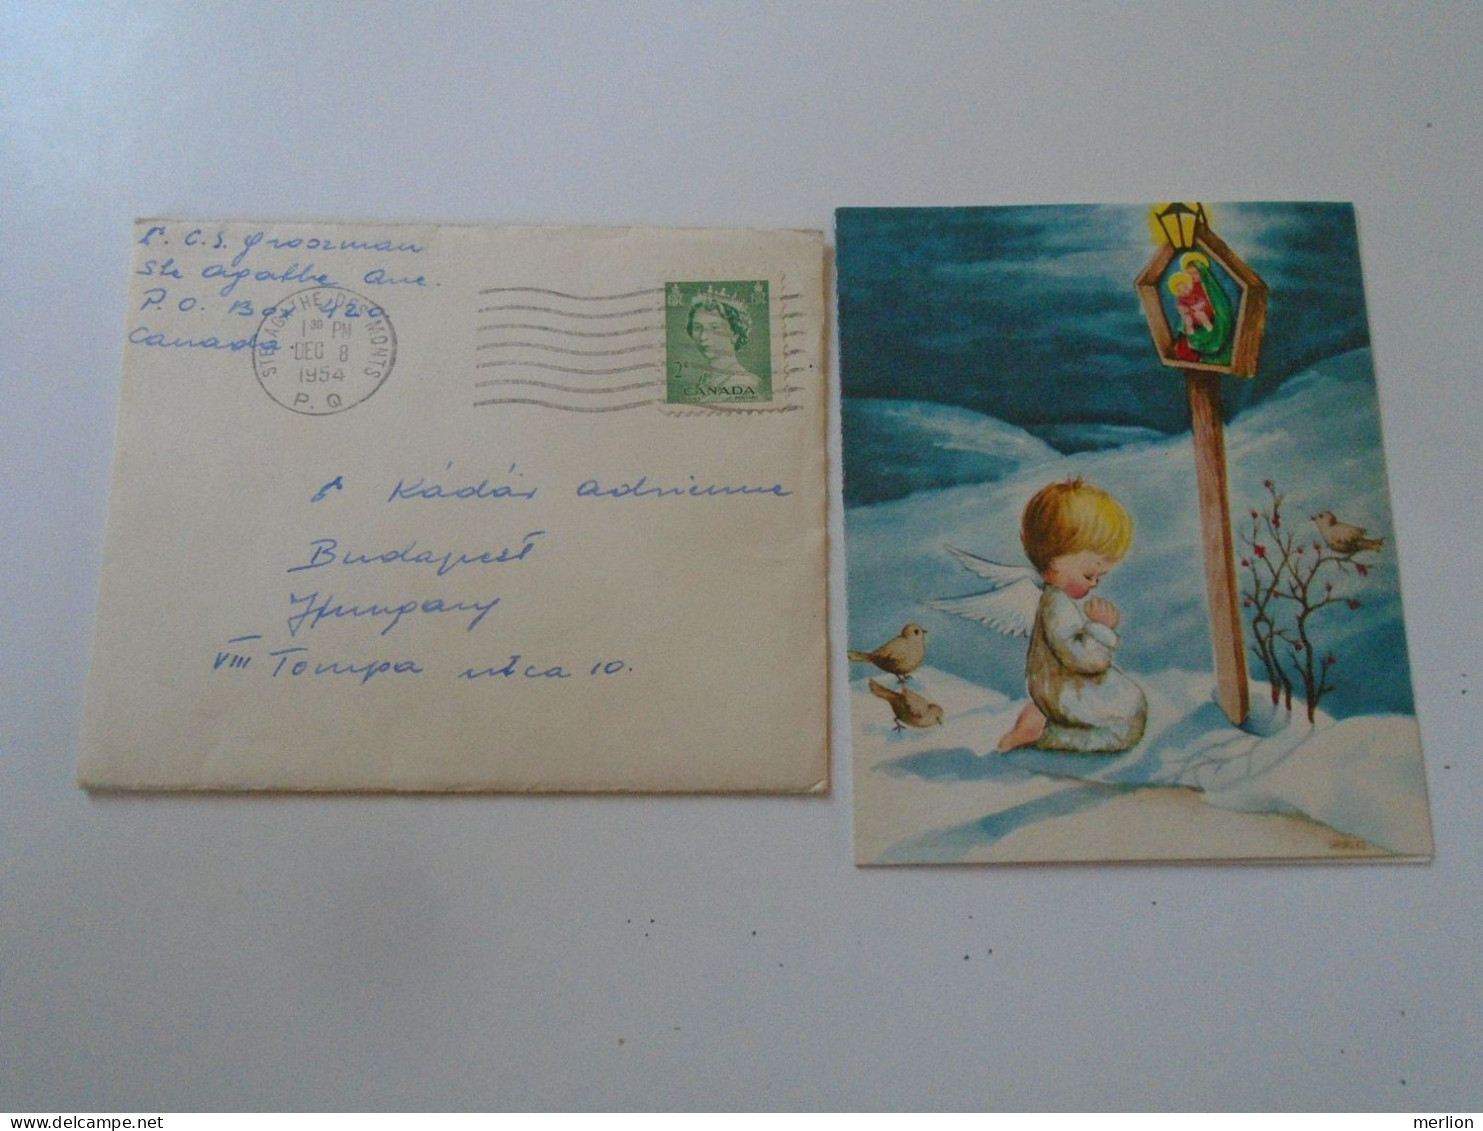 D197983  Canada   Cover  1954 Ste. Agathe Des Monts     Sent To Hungary    Budapest -stamp  QEII - Covers & Documents